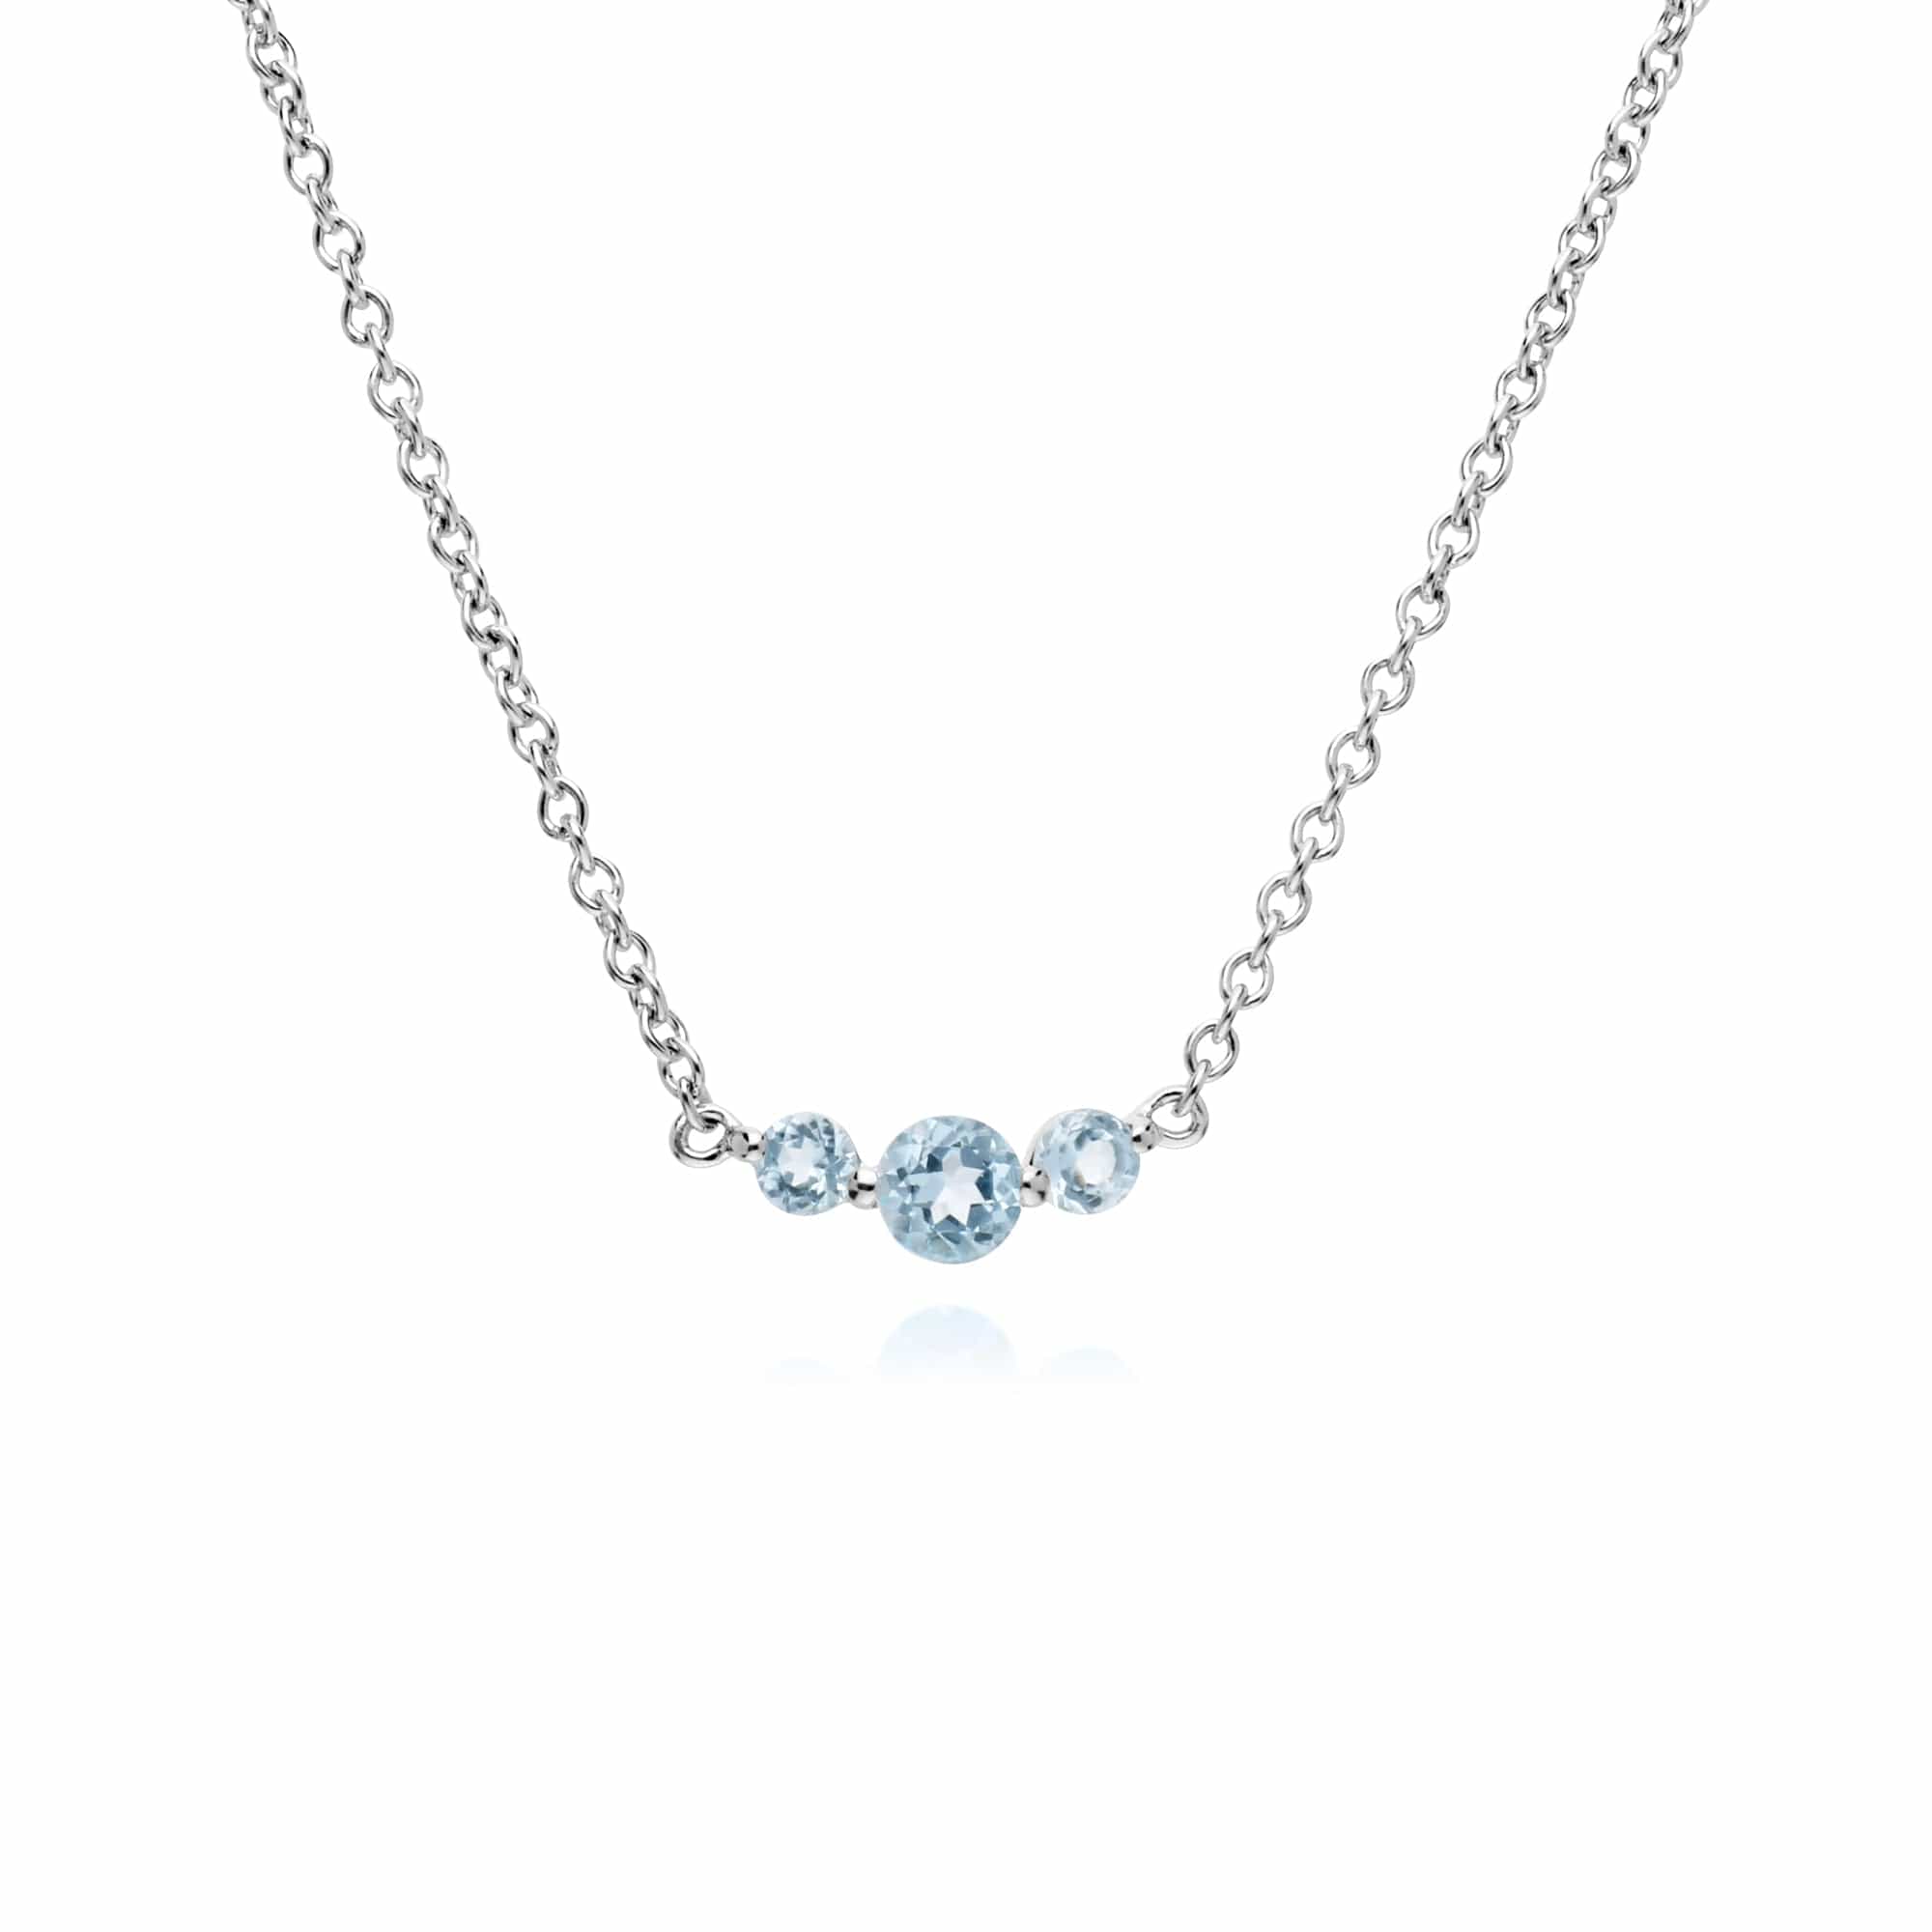 270N034201925-270L011101925 Classic Round Blue Topaz Three Stone Gradient Bracelet & Necklace Set in 925 Sterling Silver 2